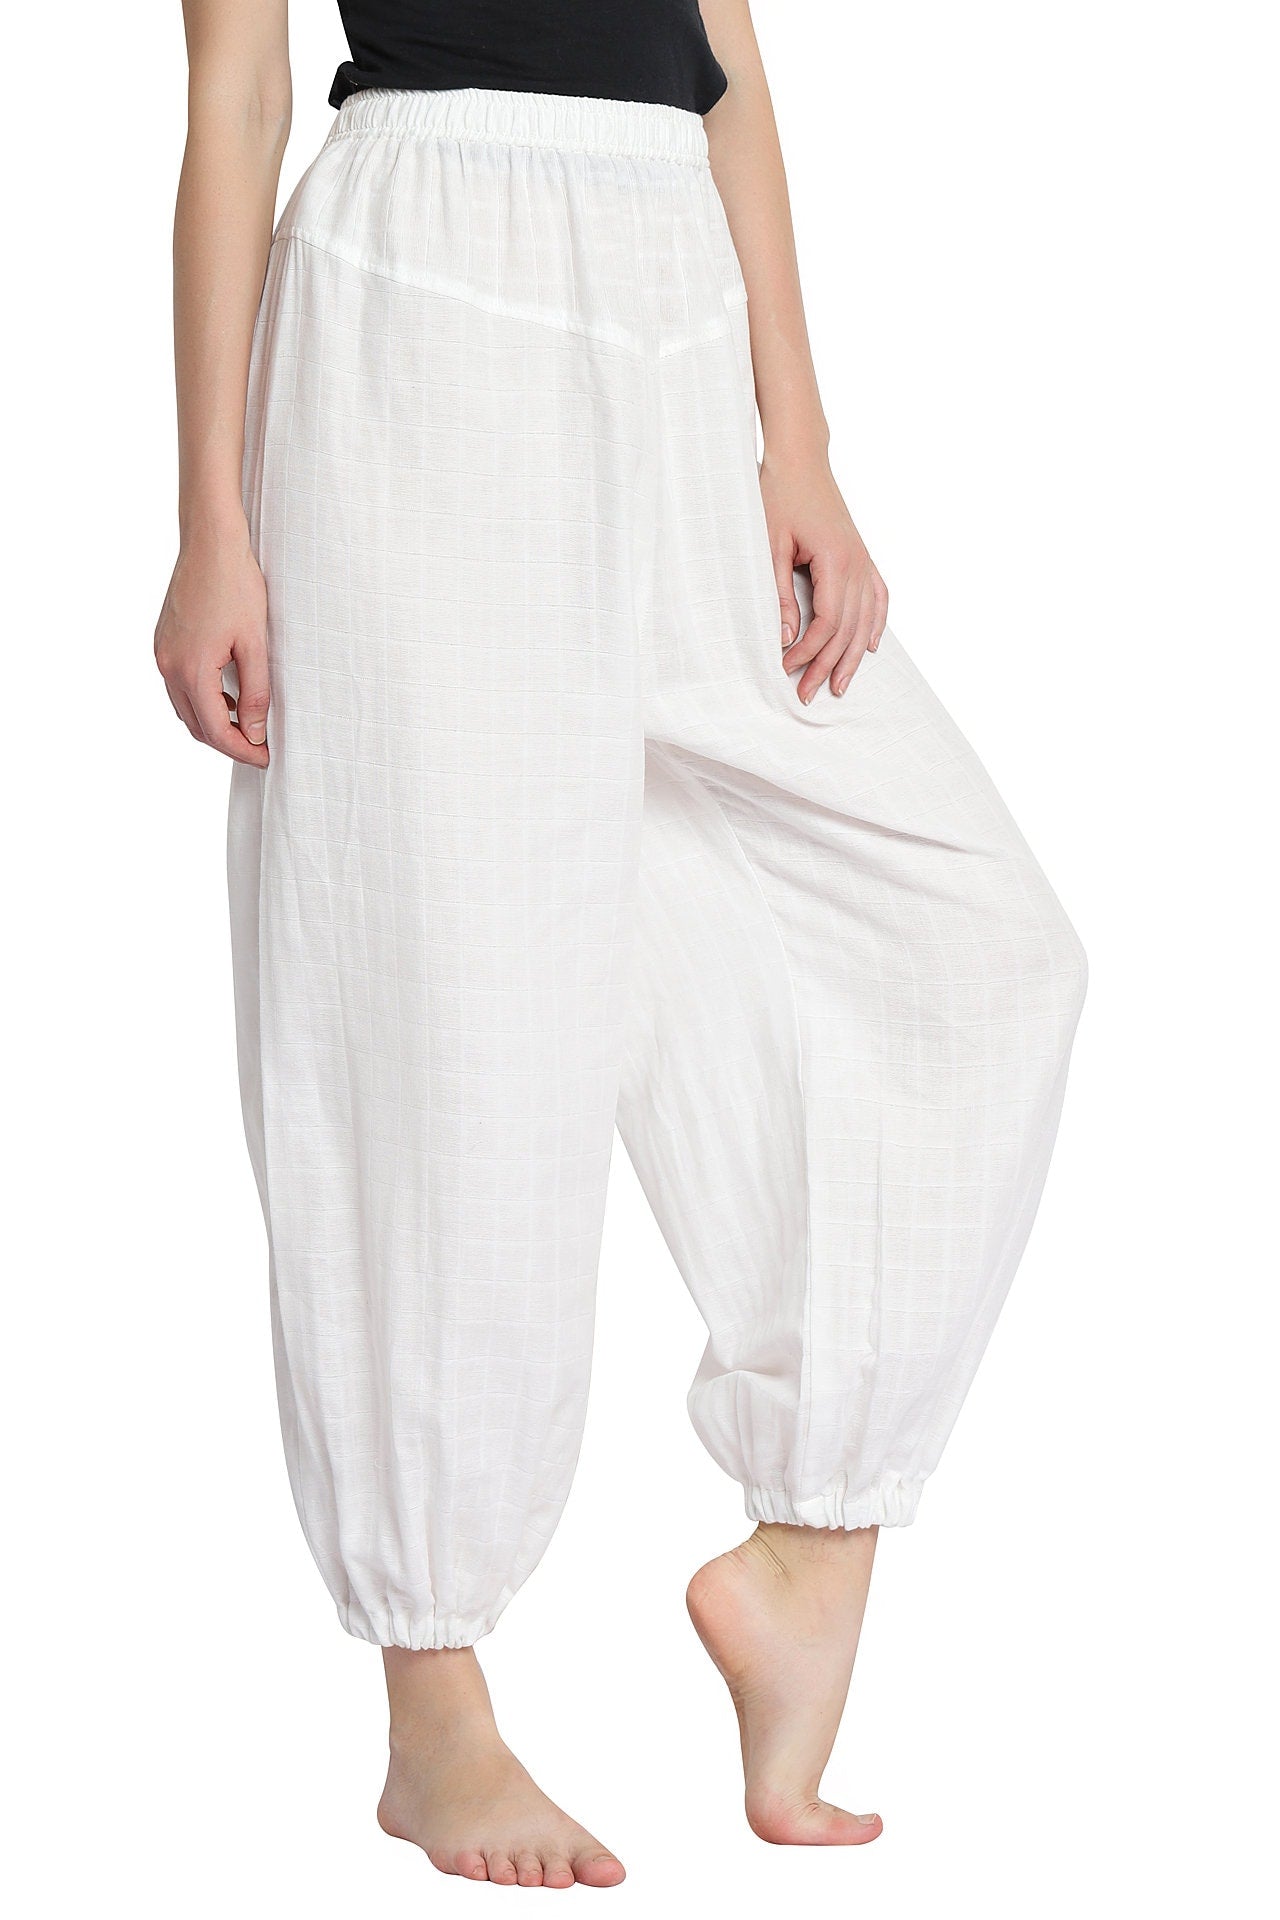 Organic Cotton Yoga Loose Fit Pants Manufacturer Supplier from